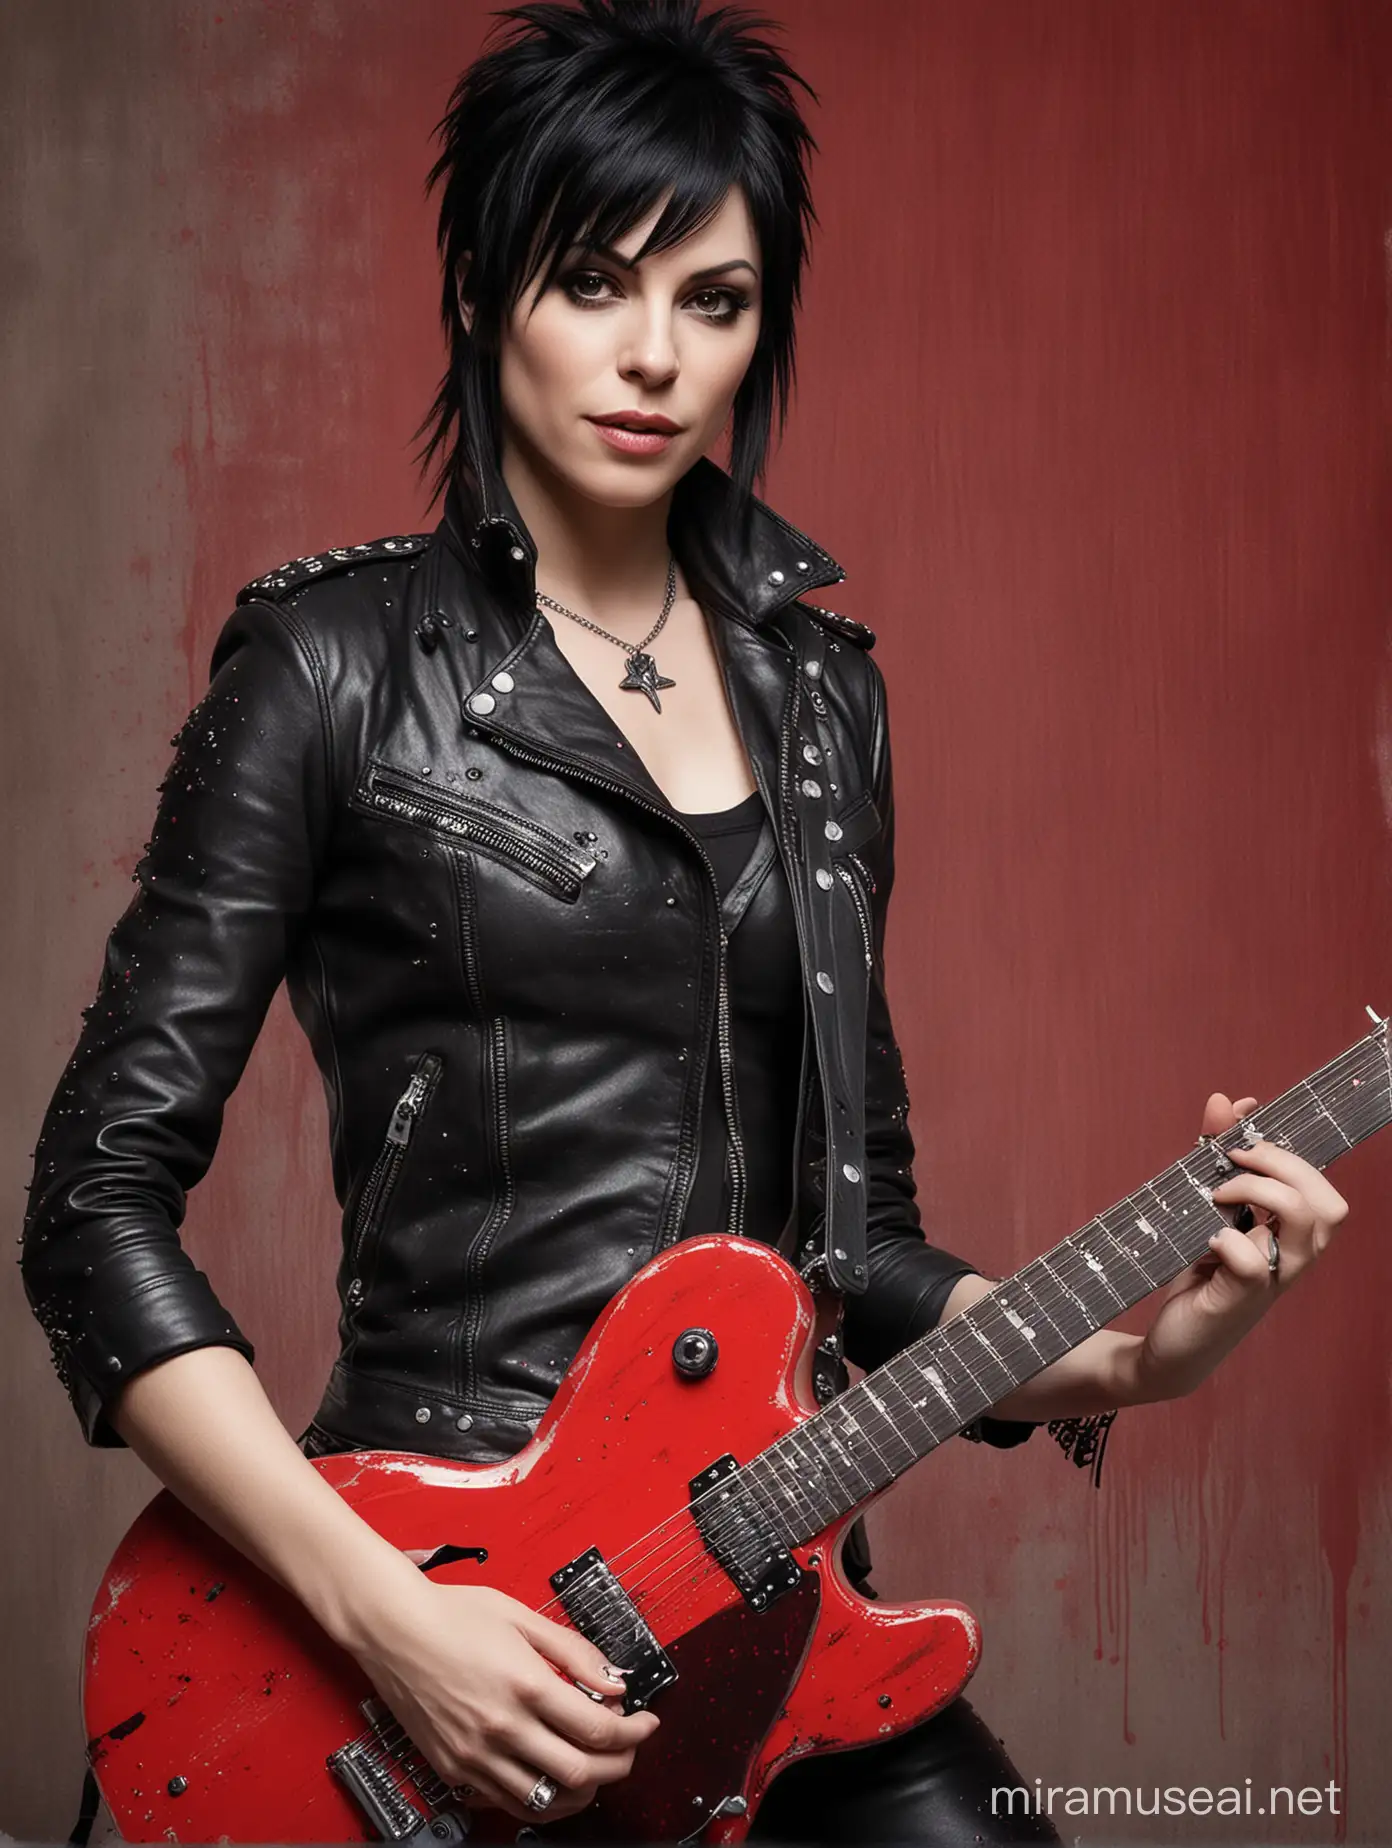 Very detailed realistic photographic image for the album poster featuring female guitarist Joan Jett in a rocker-style costume looking very attractive playing her guitar, the texture and color are very firm and clear, the background is white with red paint spots,